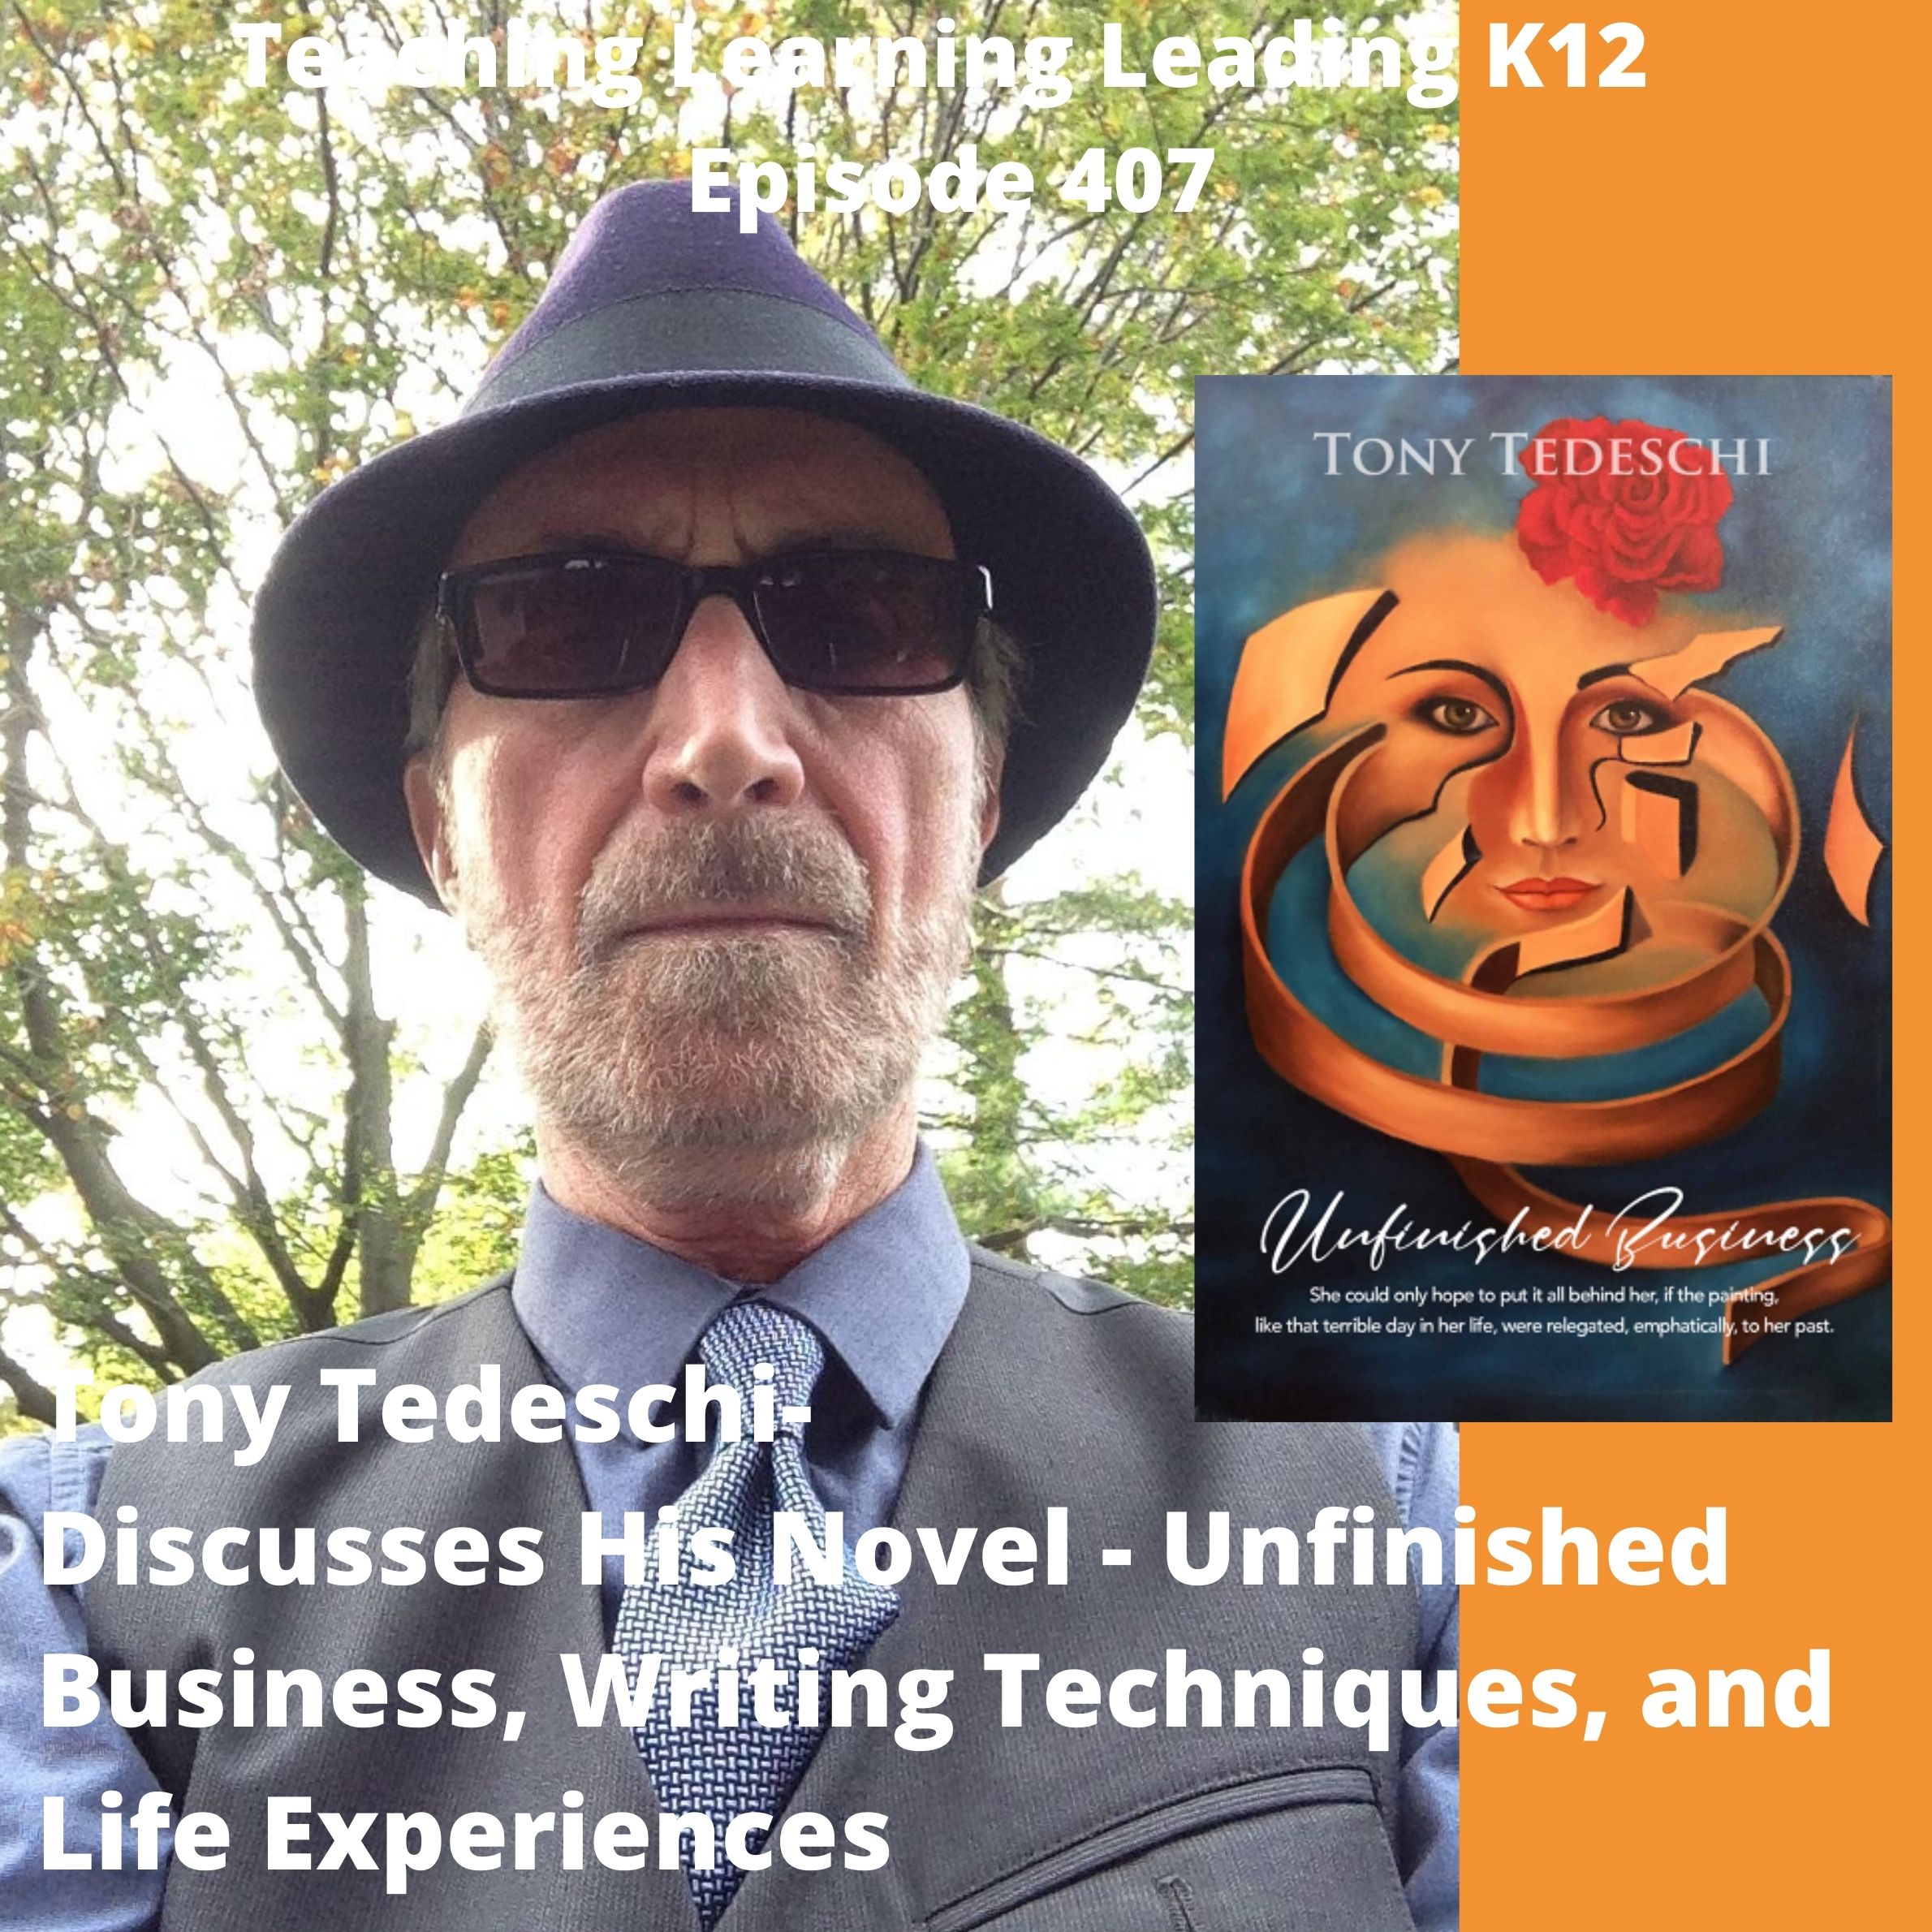 Tony Tedeschi - Talks about his novel - Unfinished Business, Writing Techniques, and Life Stories - 407 Image